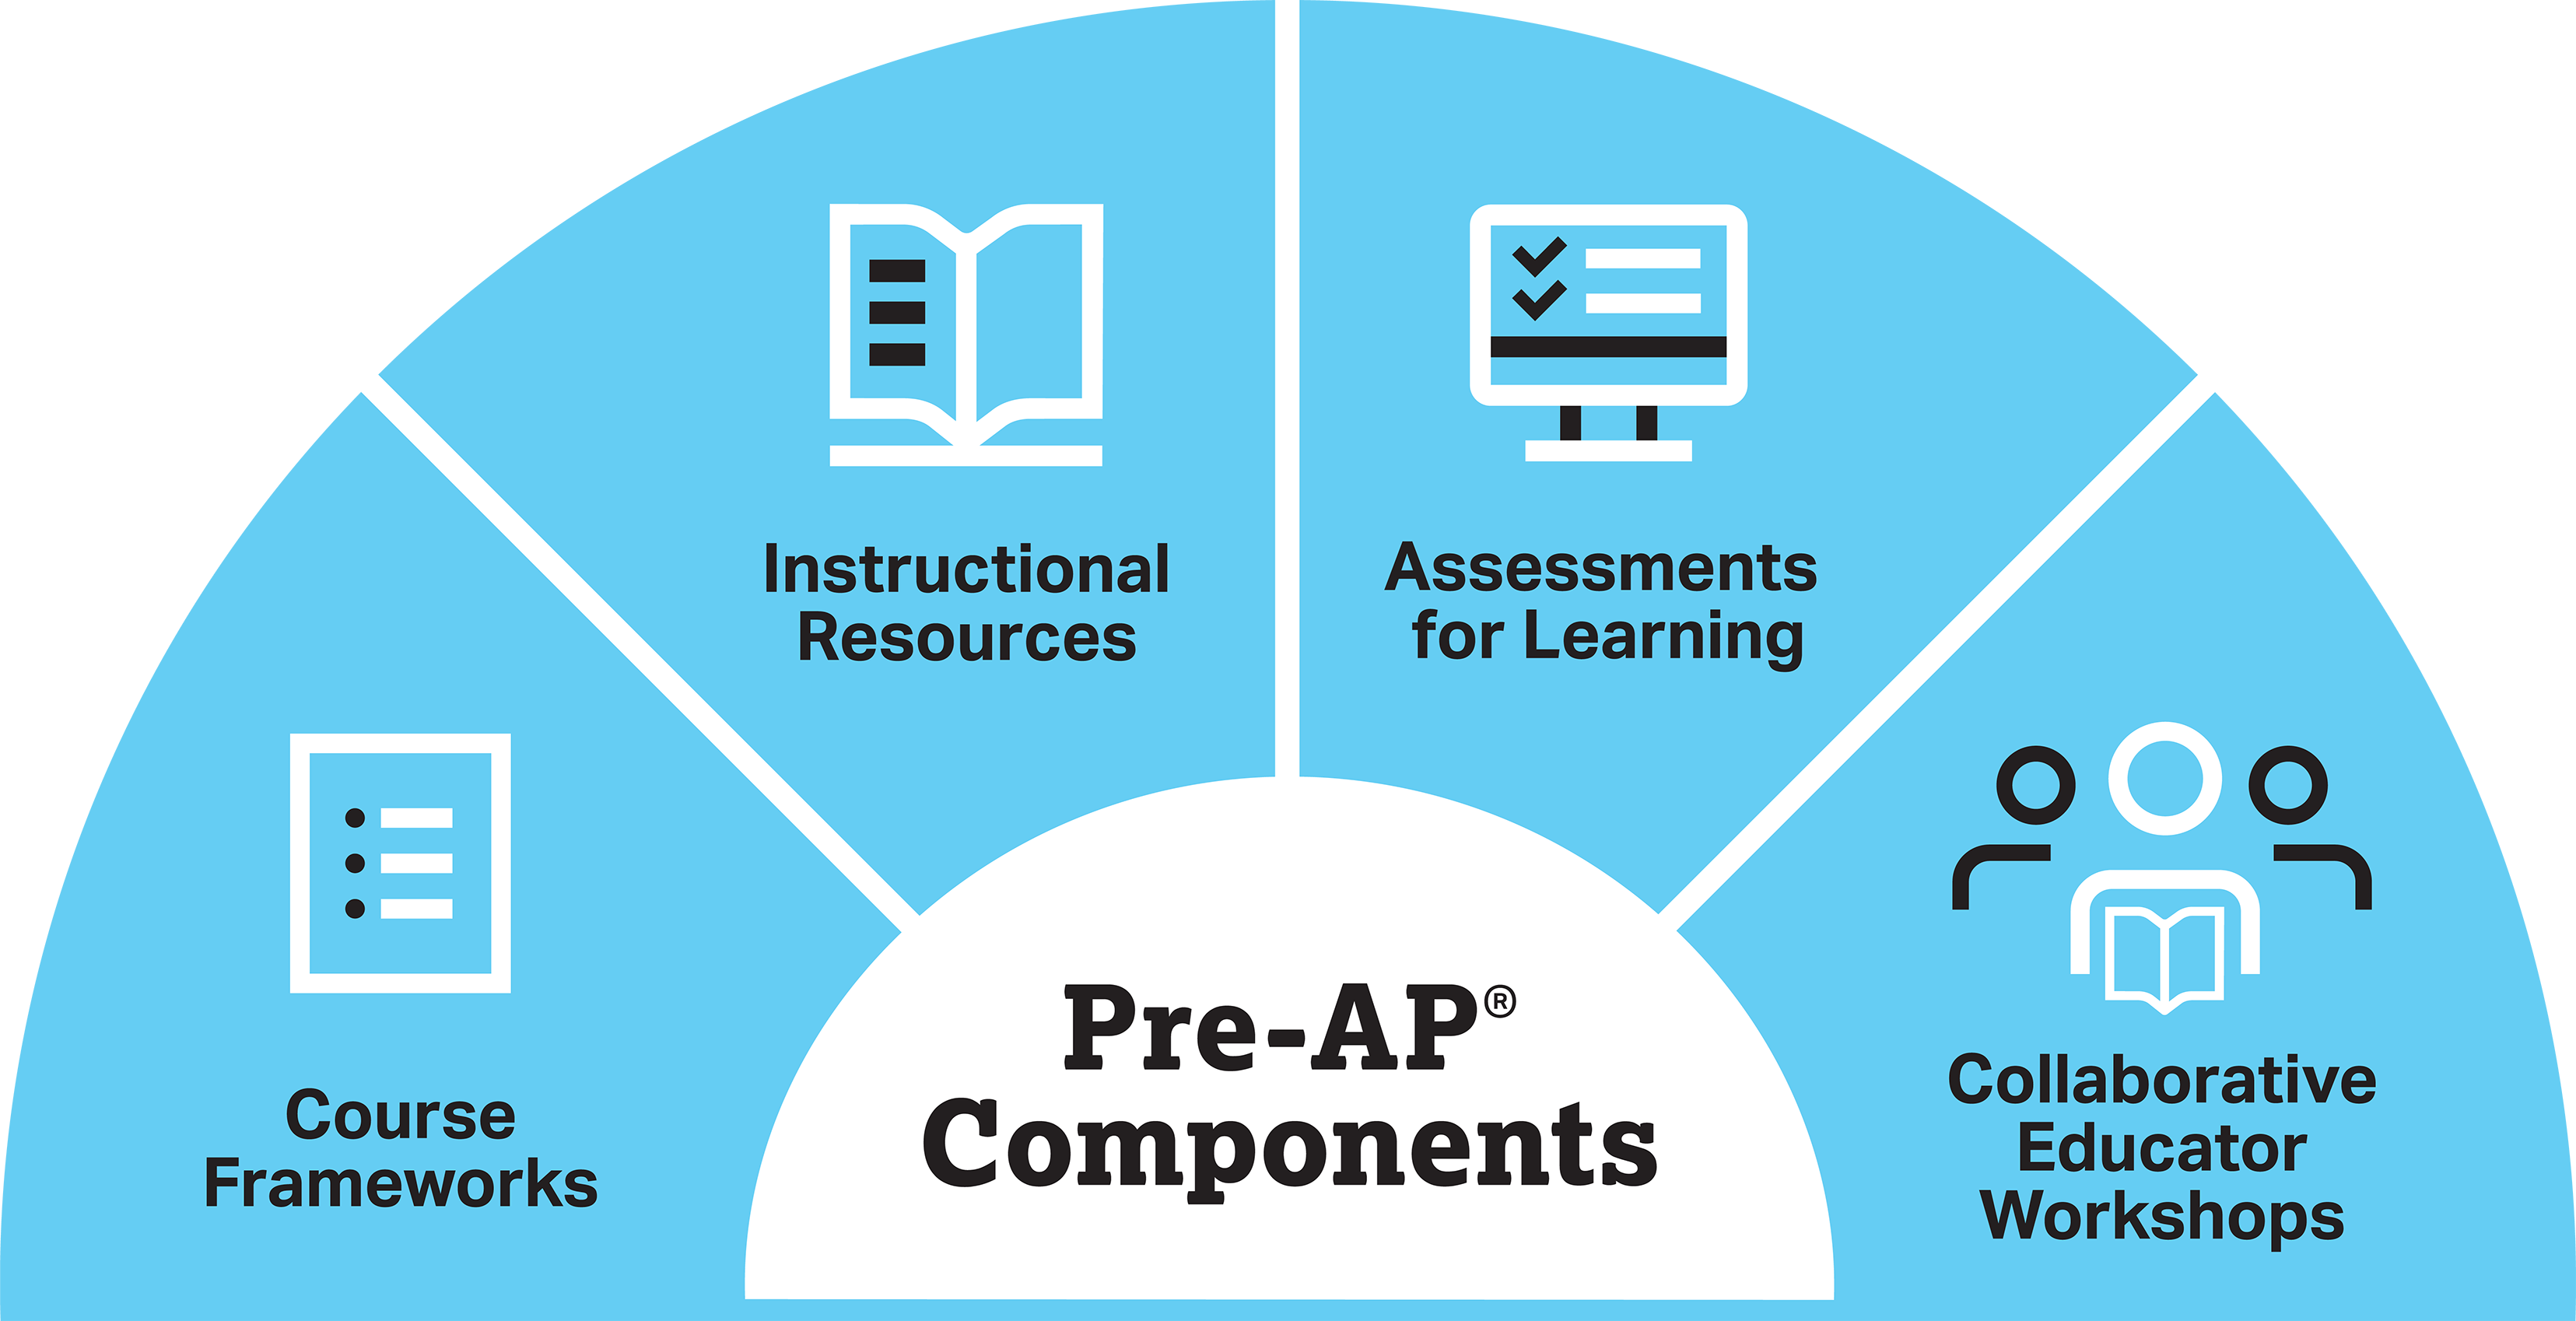 Components of Pre-AP: Course Frameworks, Instructional Resources, Assessments for Learning and Collaborative Educator Workshops